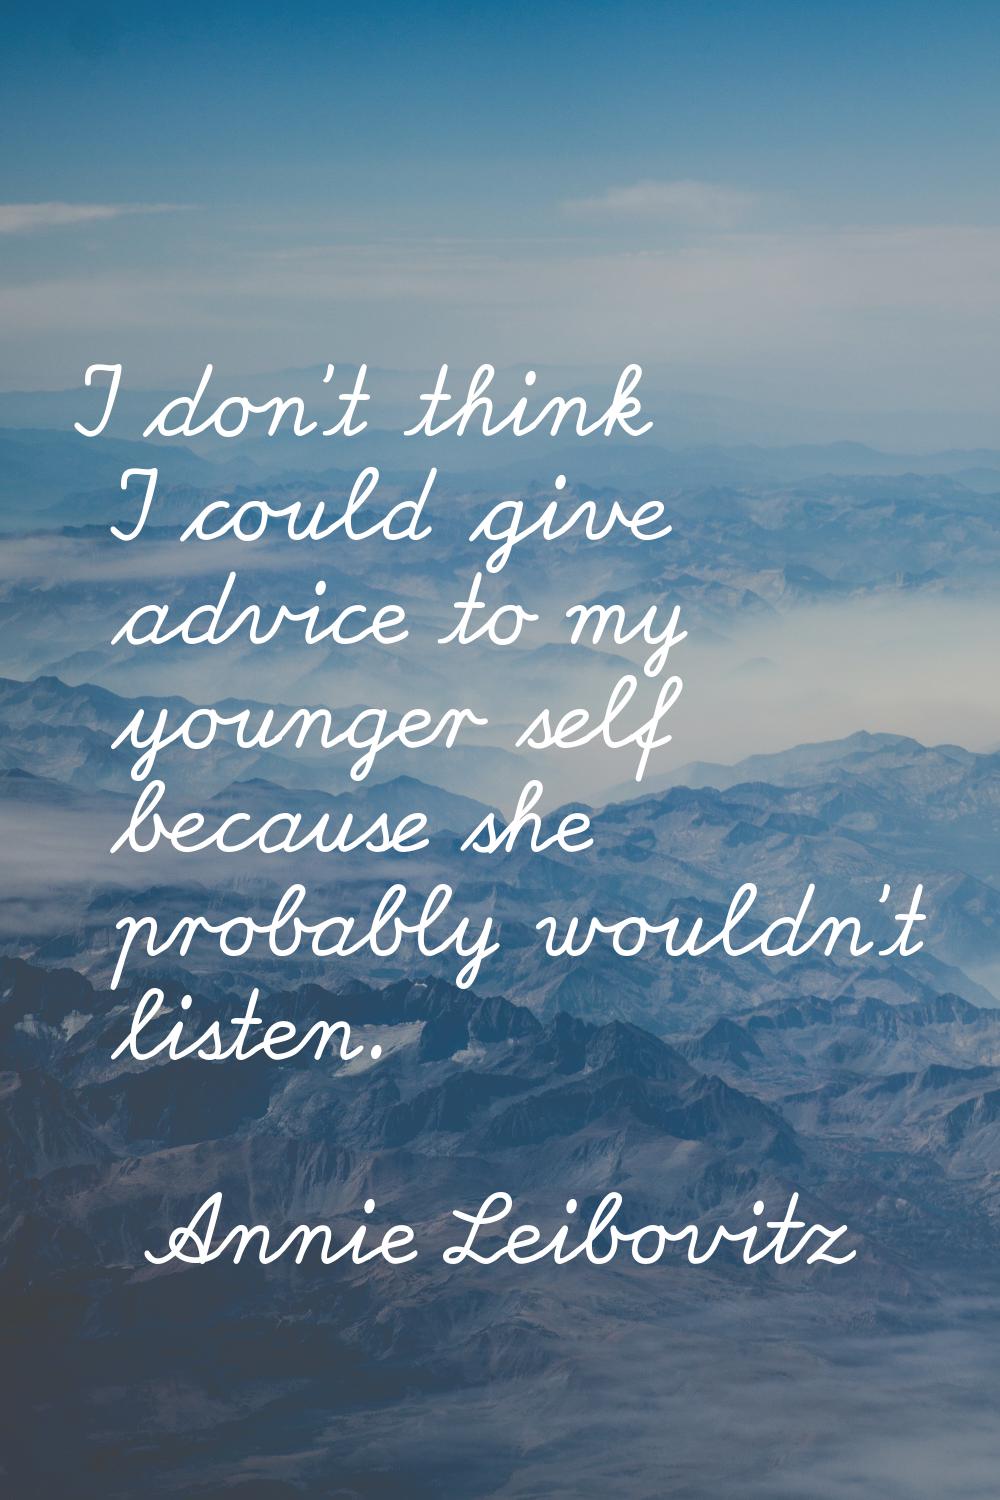 I don't think I could give advice to my younger self because she probably wouldn't listen.